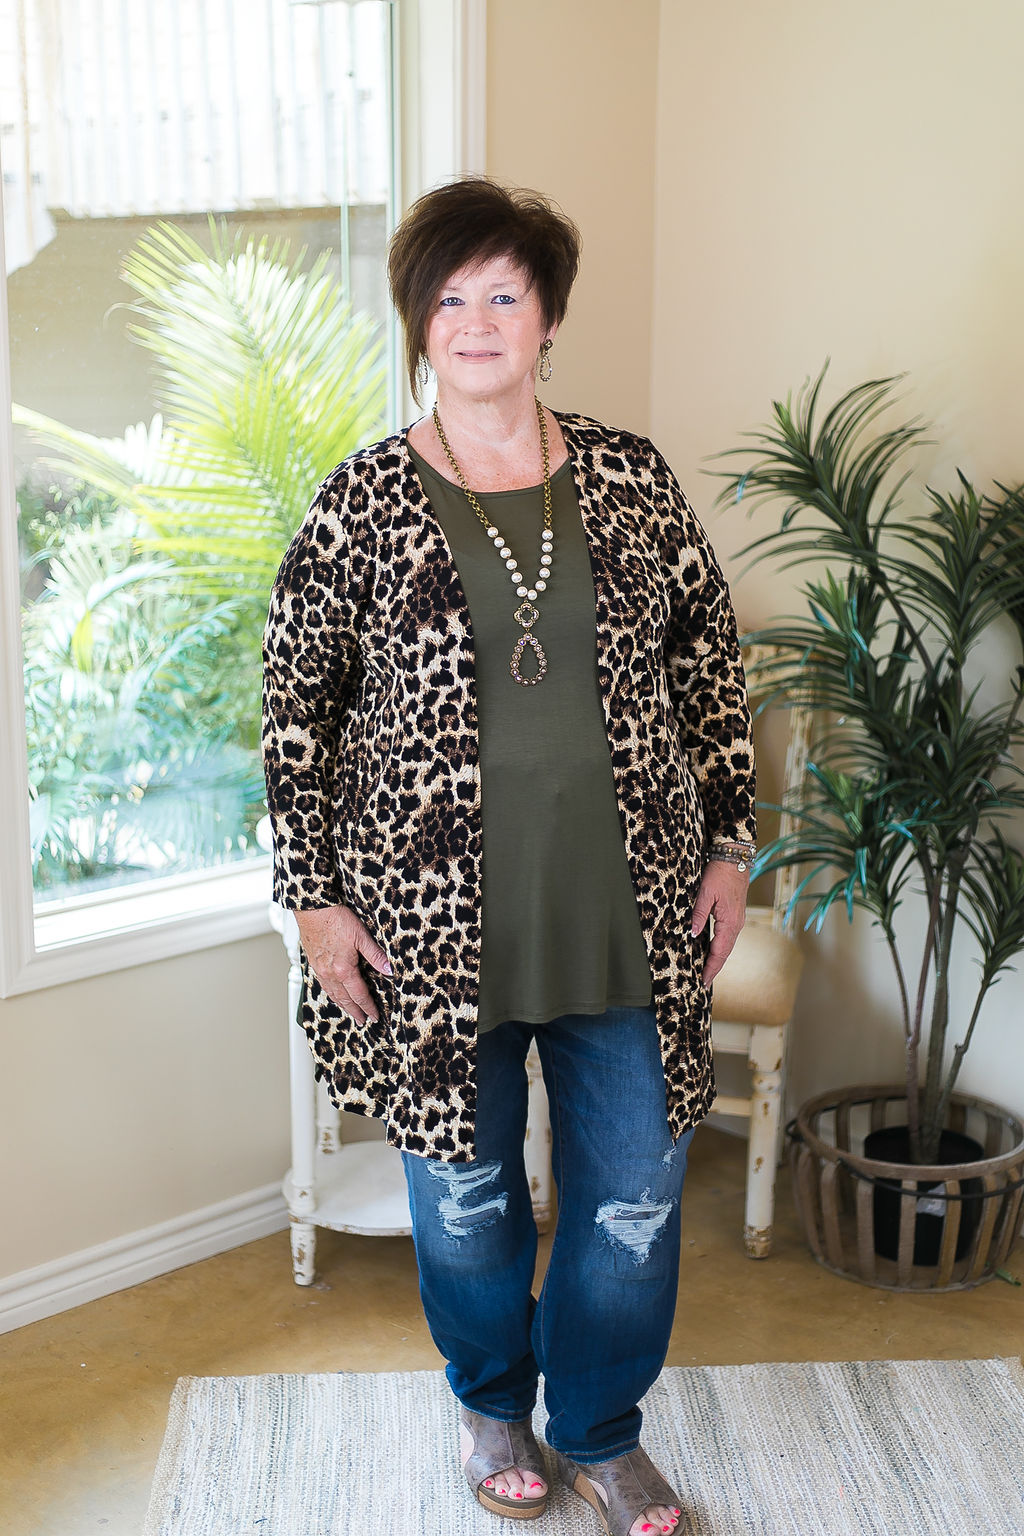 All Eyes On You Leopard Print Cardigan - Giddy Up Glamour Boutique